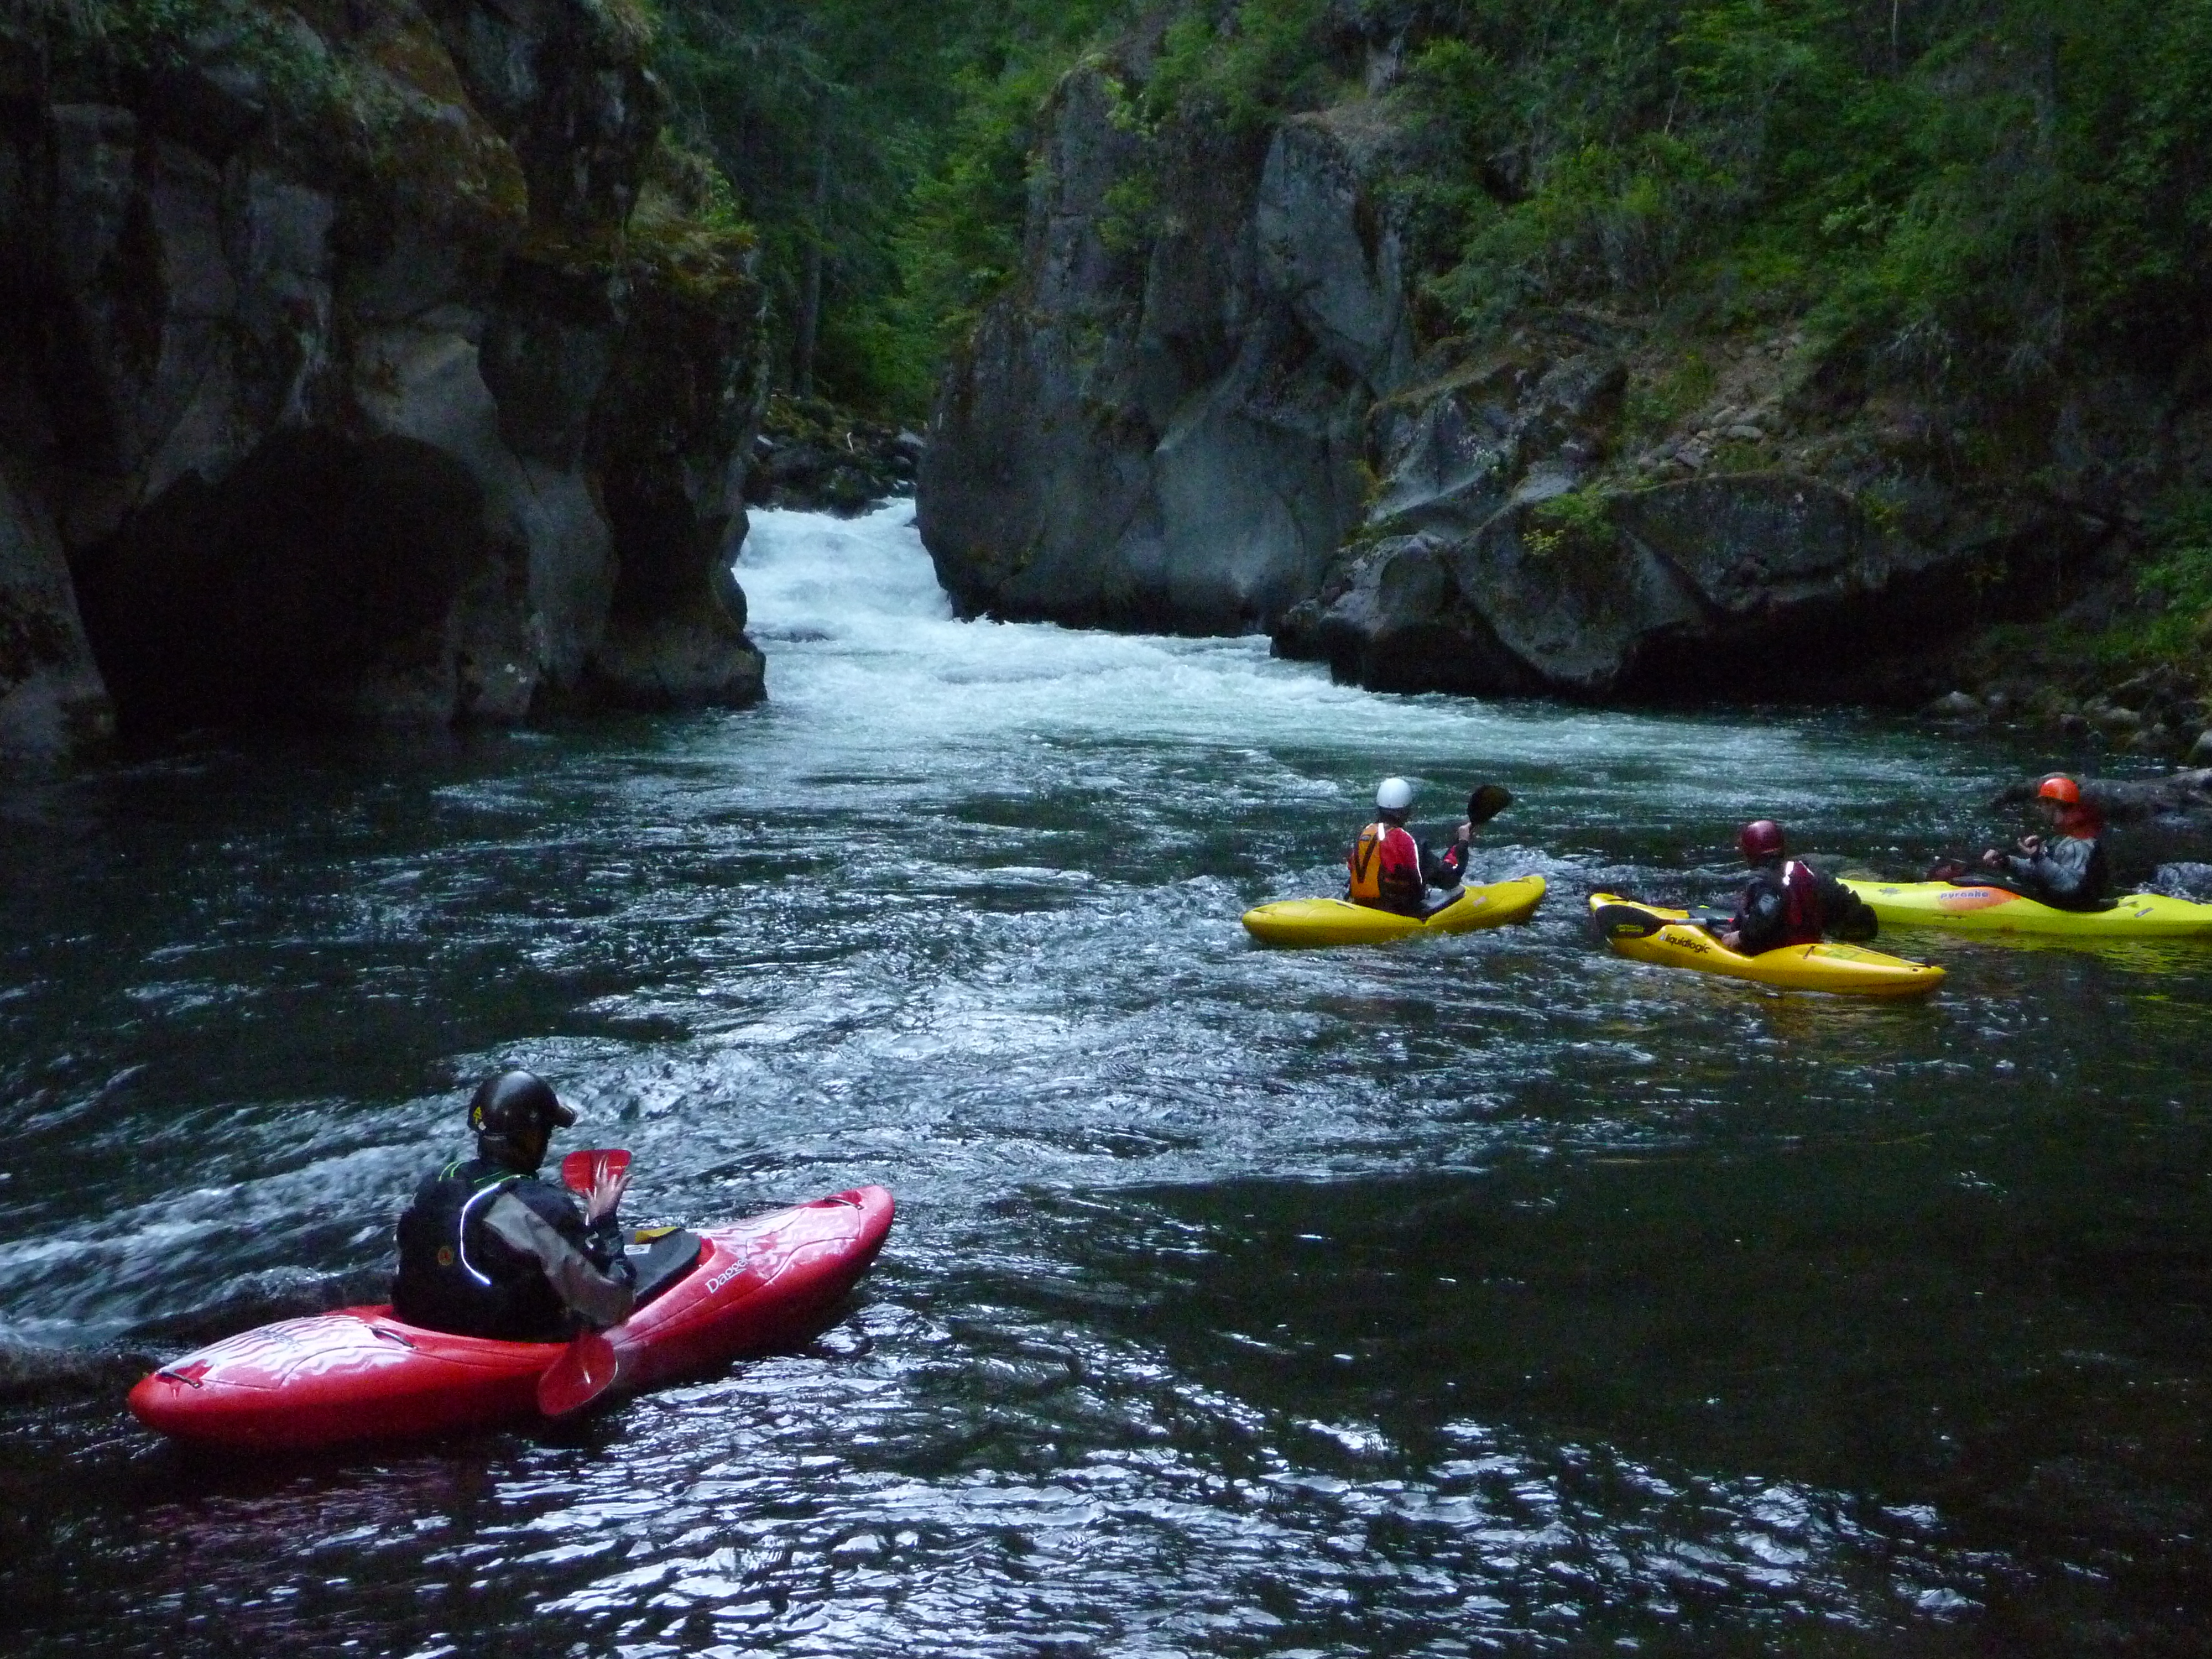 A new section of the White Salmon River soon to come